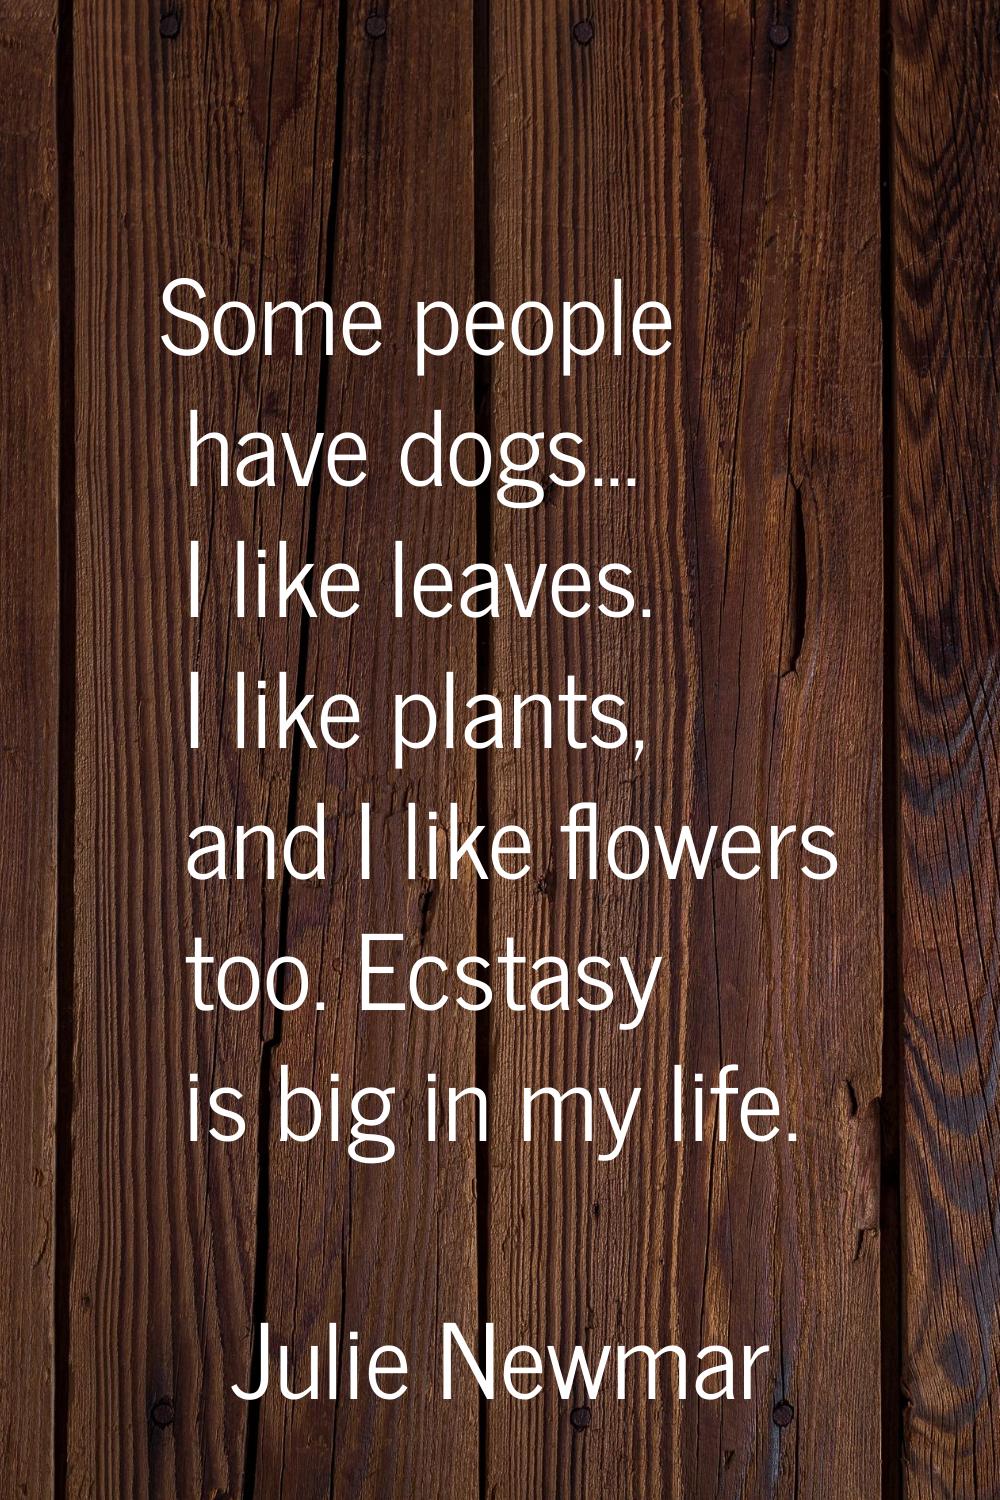 Some people have dogs... I like leaves. I like plants, and I like flowers too. Ecstasy is big in my